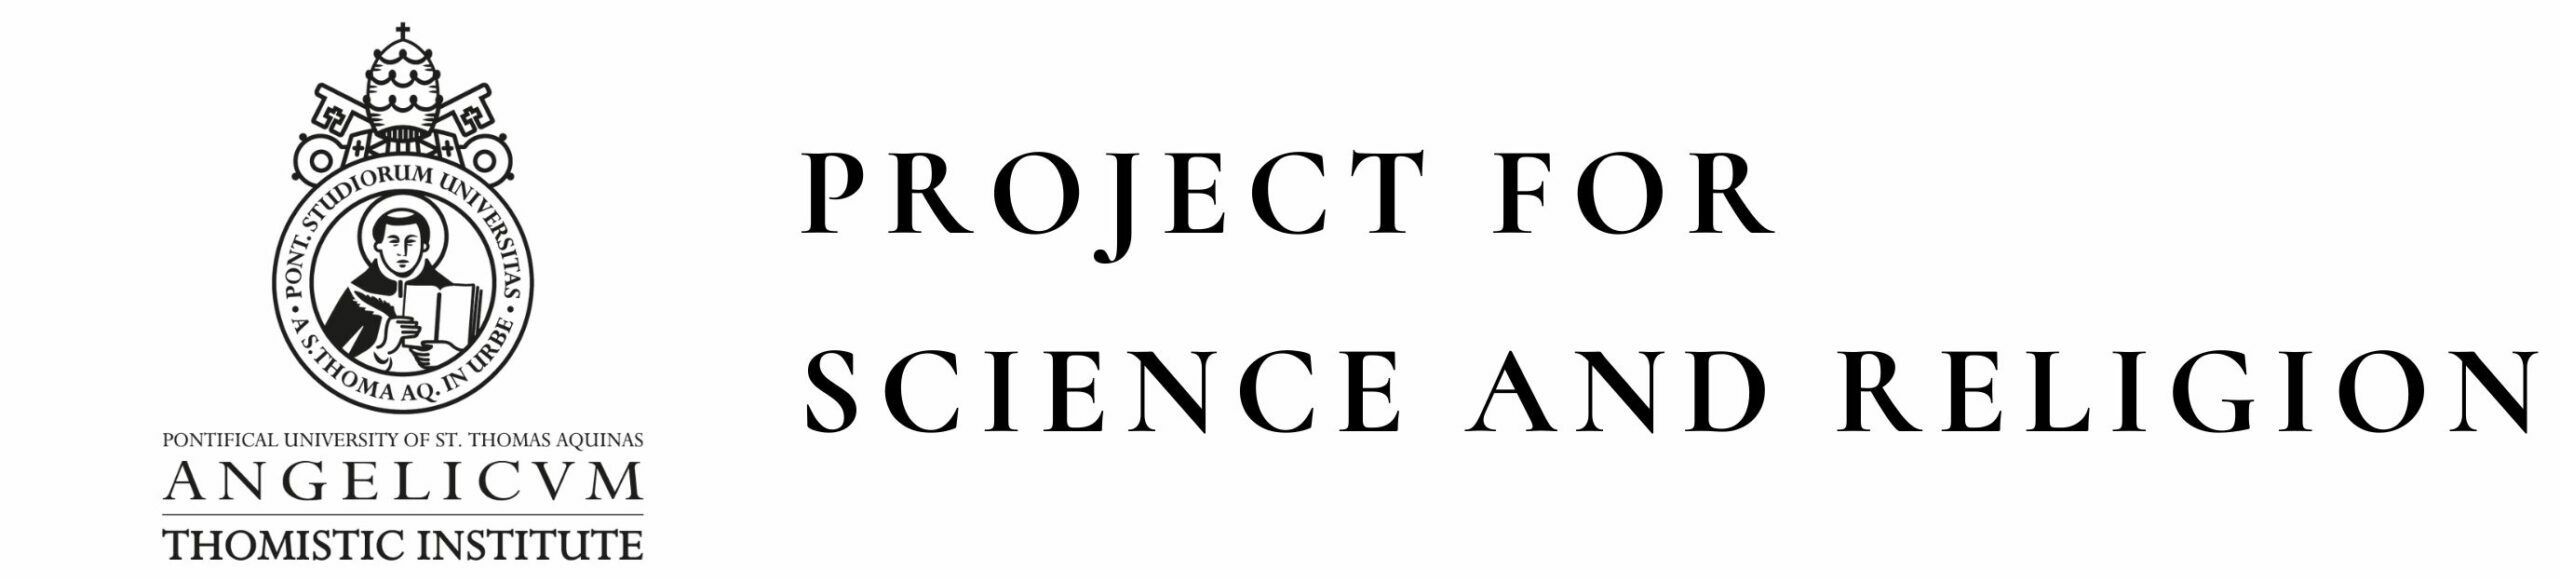 Project for Science and Religion